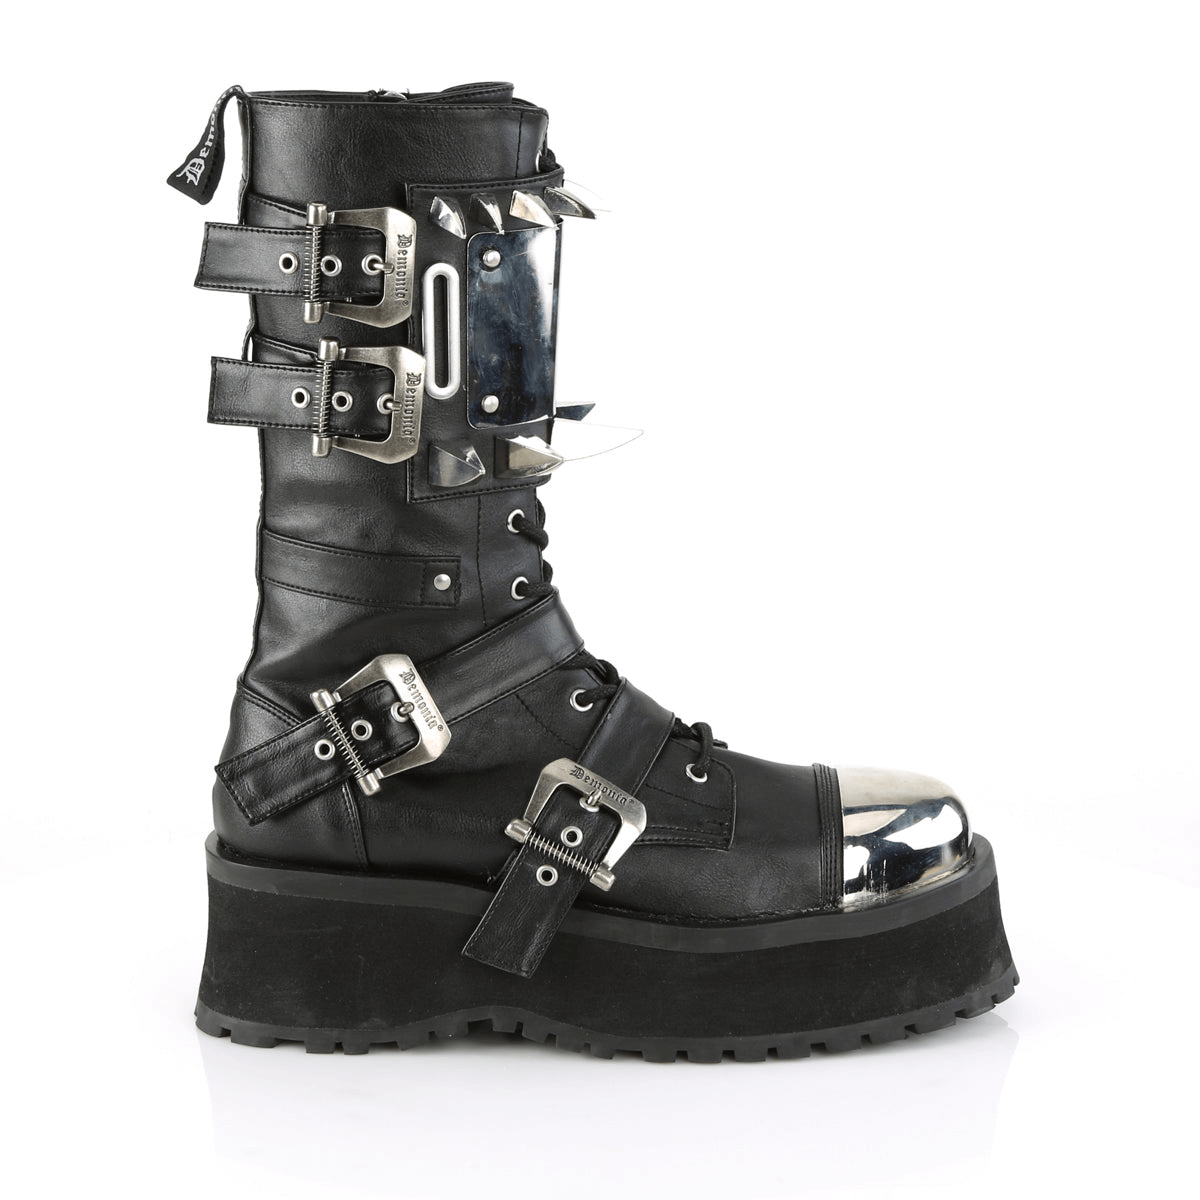 DEMONIA Chrome Claw Spike Mid-Calf Boots With Buckles